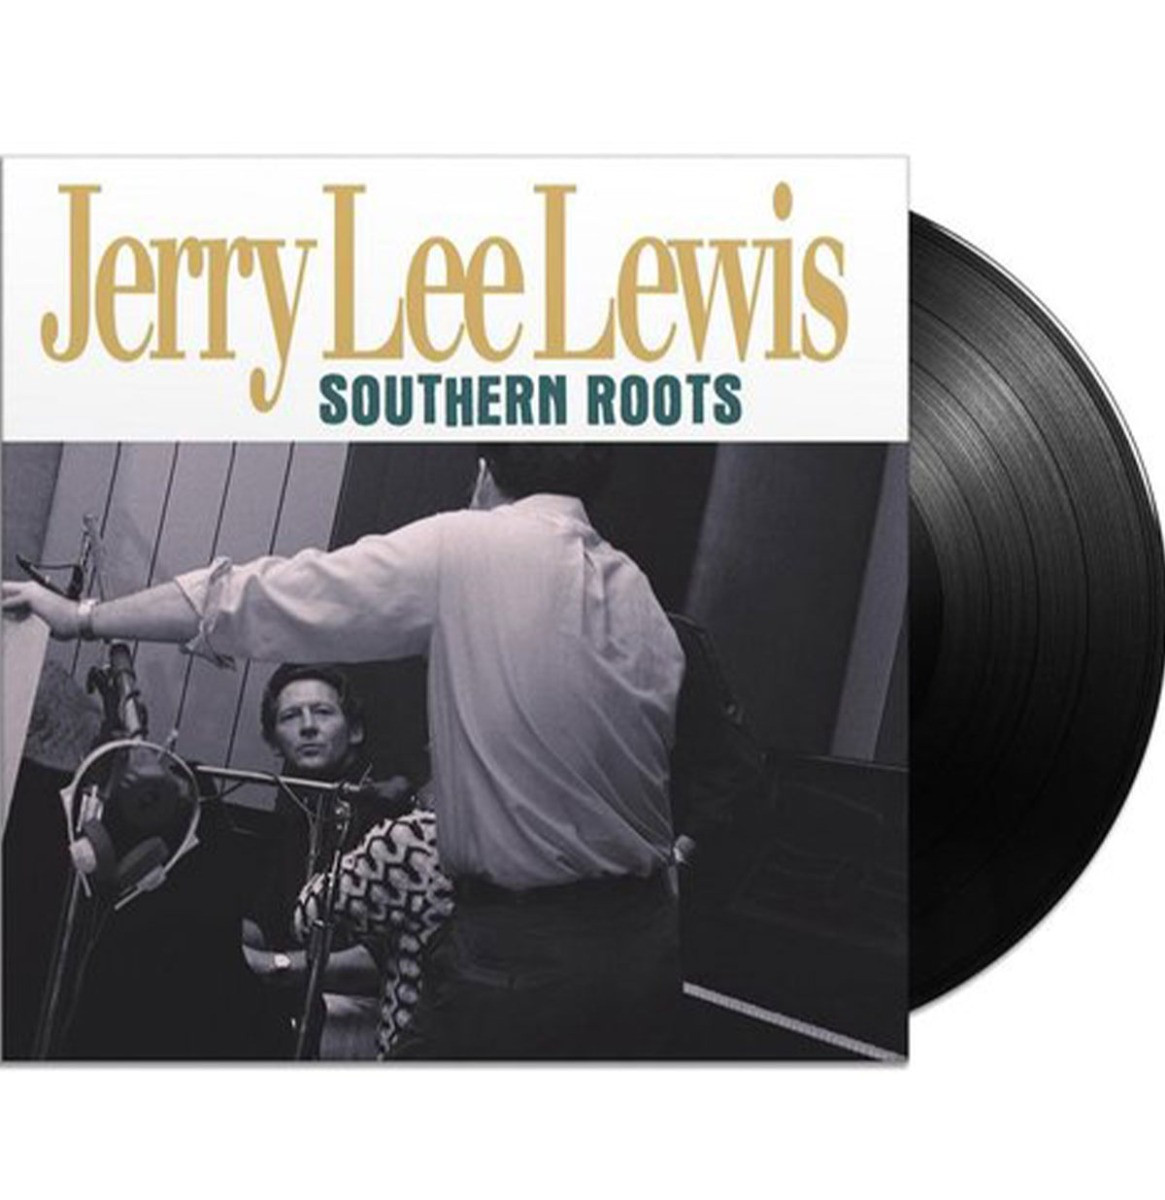 Jerry Lee Lewis - Southern Roots: The Original Sessions 2LP